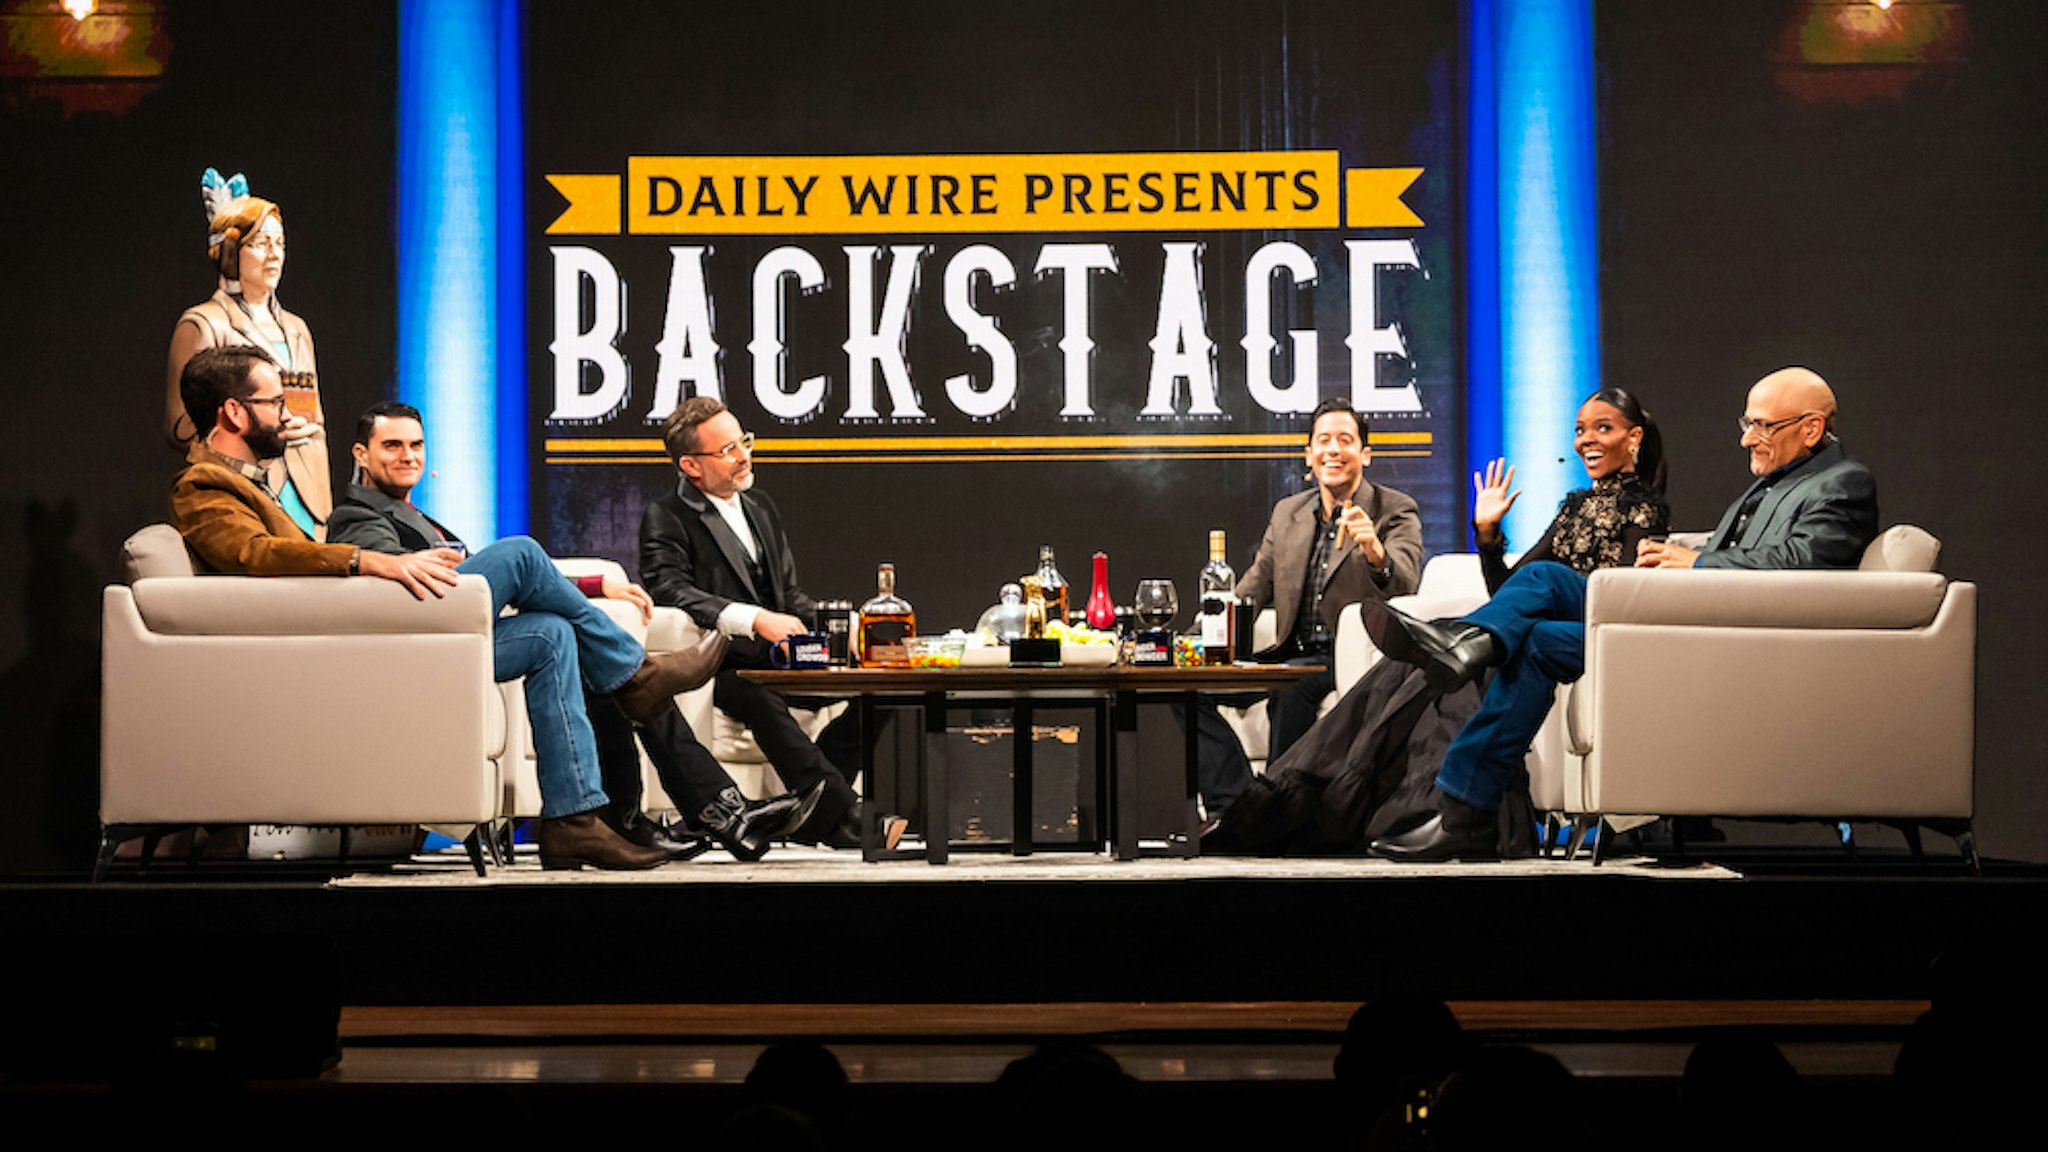 NASHVILLE, TENNESSEE - OCTOBER 12: Matt Walsh, Ben Shapiro, Jeremy Boreing, Michael Knowles, Candace Owens, and Andrew Klavan speak at Daily Wire Presents Backstage Live at Ryman Auditorium on October 12, 2021 in Nashville, Tennessee. (Photo by Keith Griner/Getty Images)